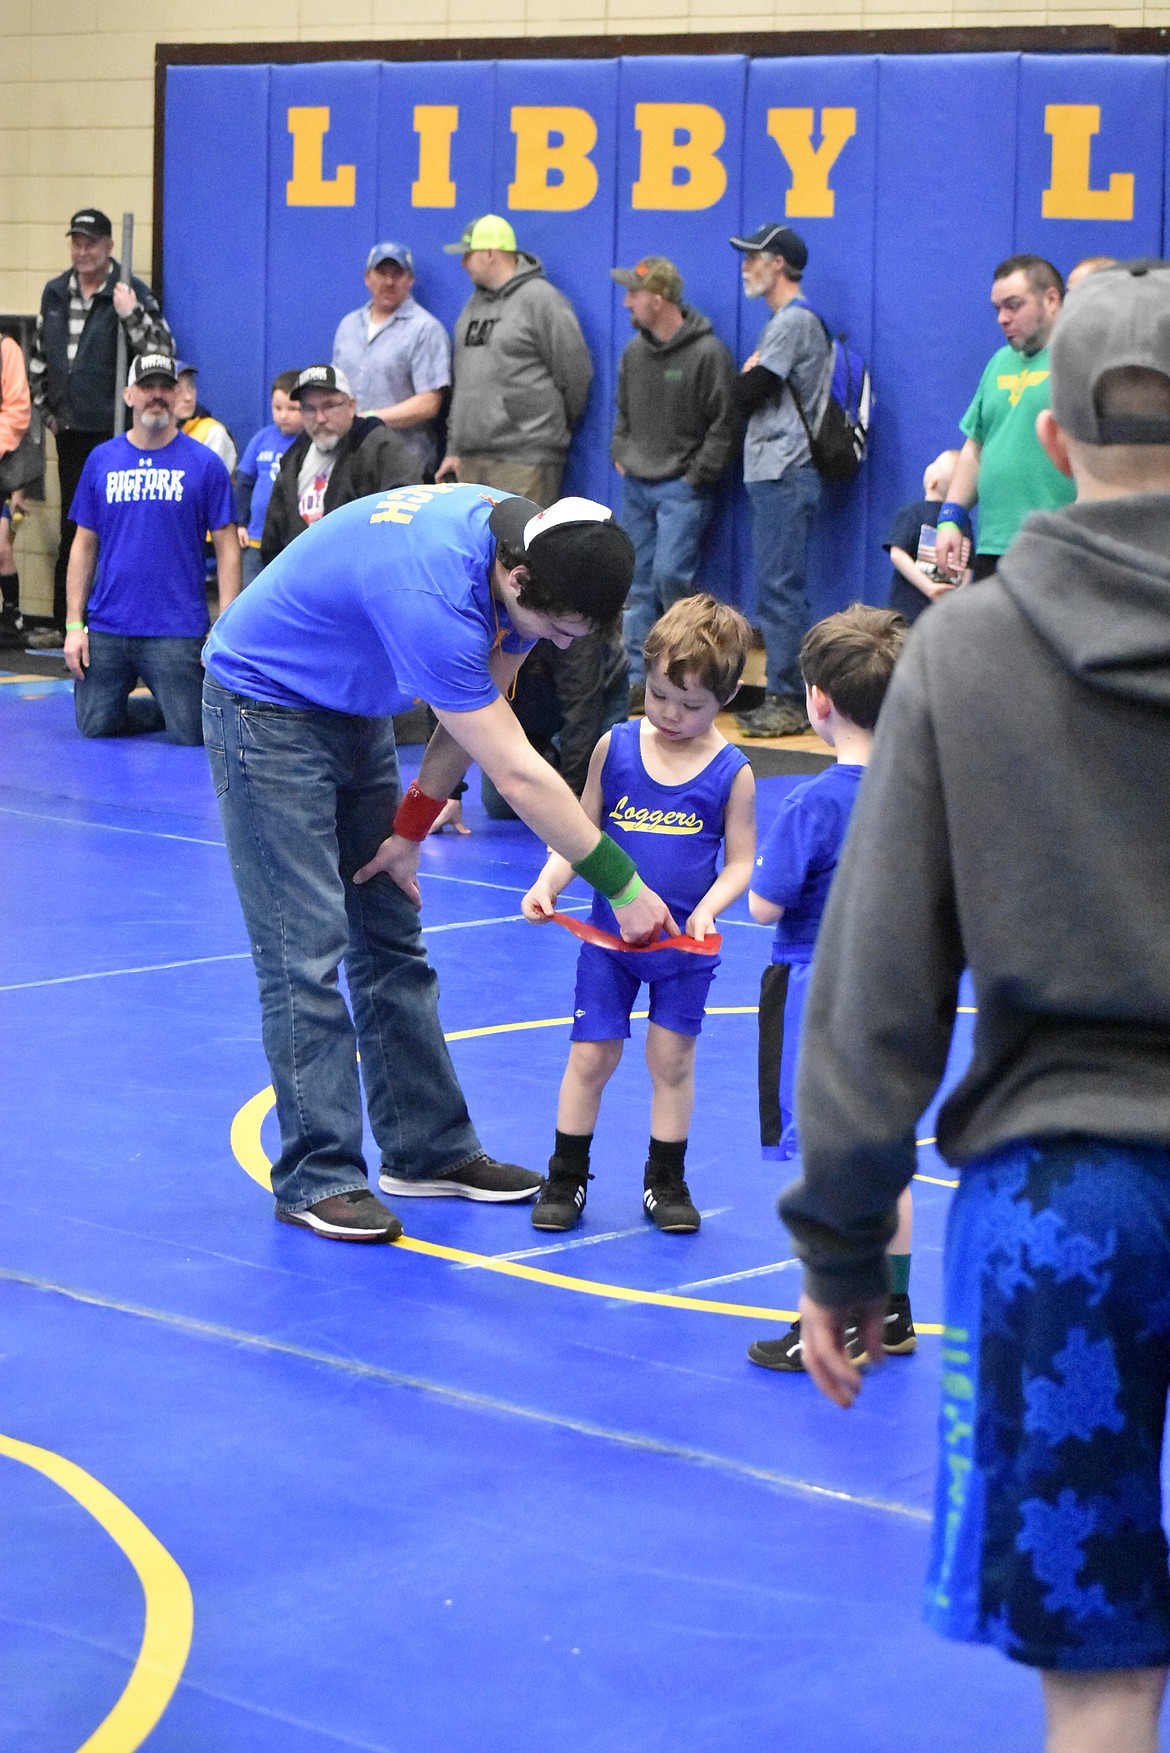 Referee Tim Carvey shows helps Waylon Edwards with the ankle band that indicates a wrestler&#146;s color during the Kootenai Klassic, March 3.